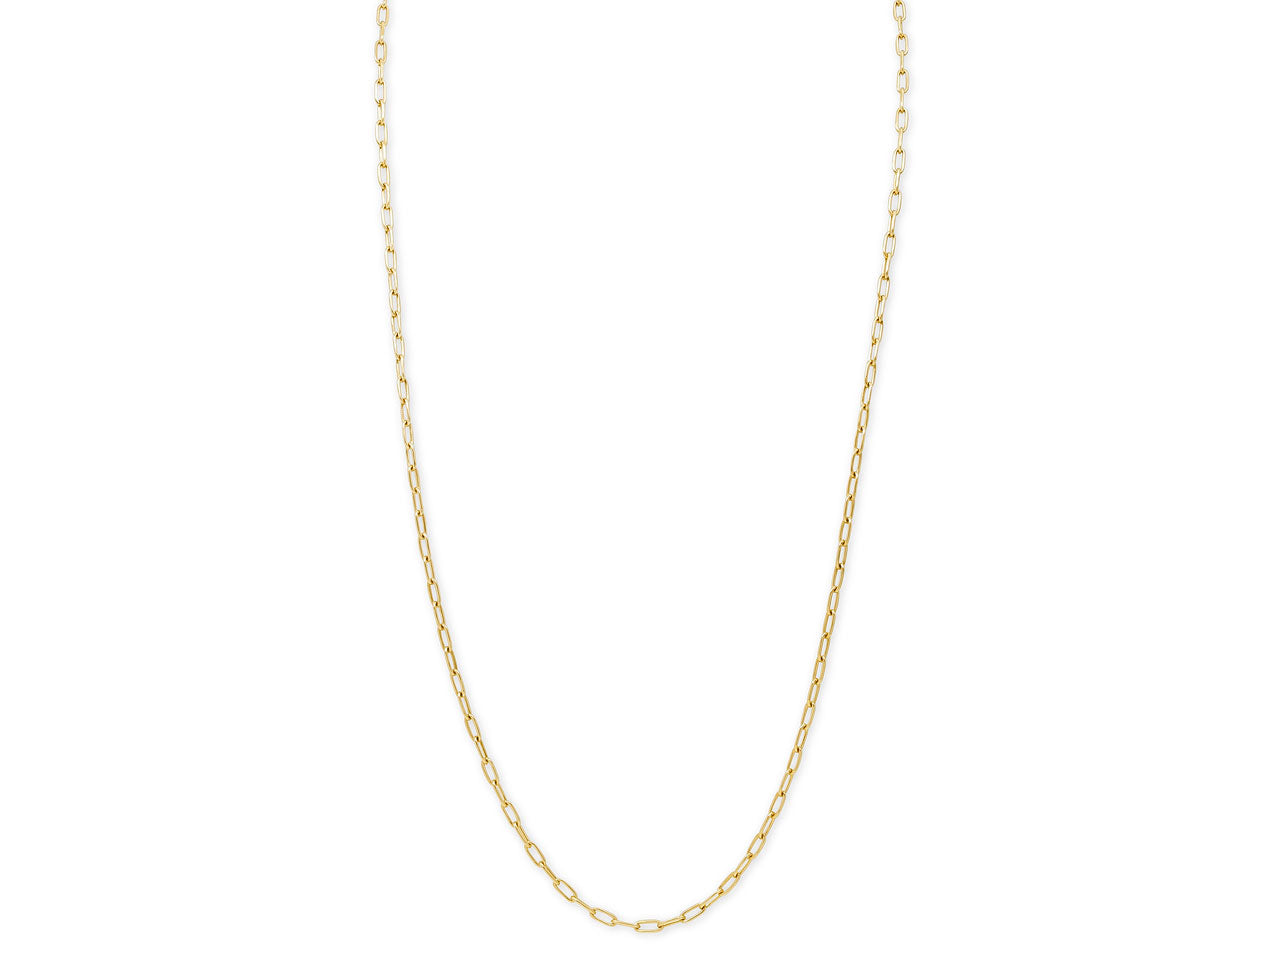 Italian Cable Link Chain in 18K Gold, Long, by Beladora